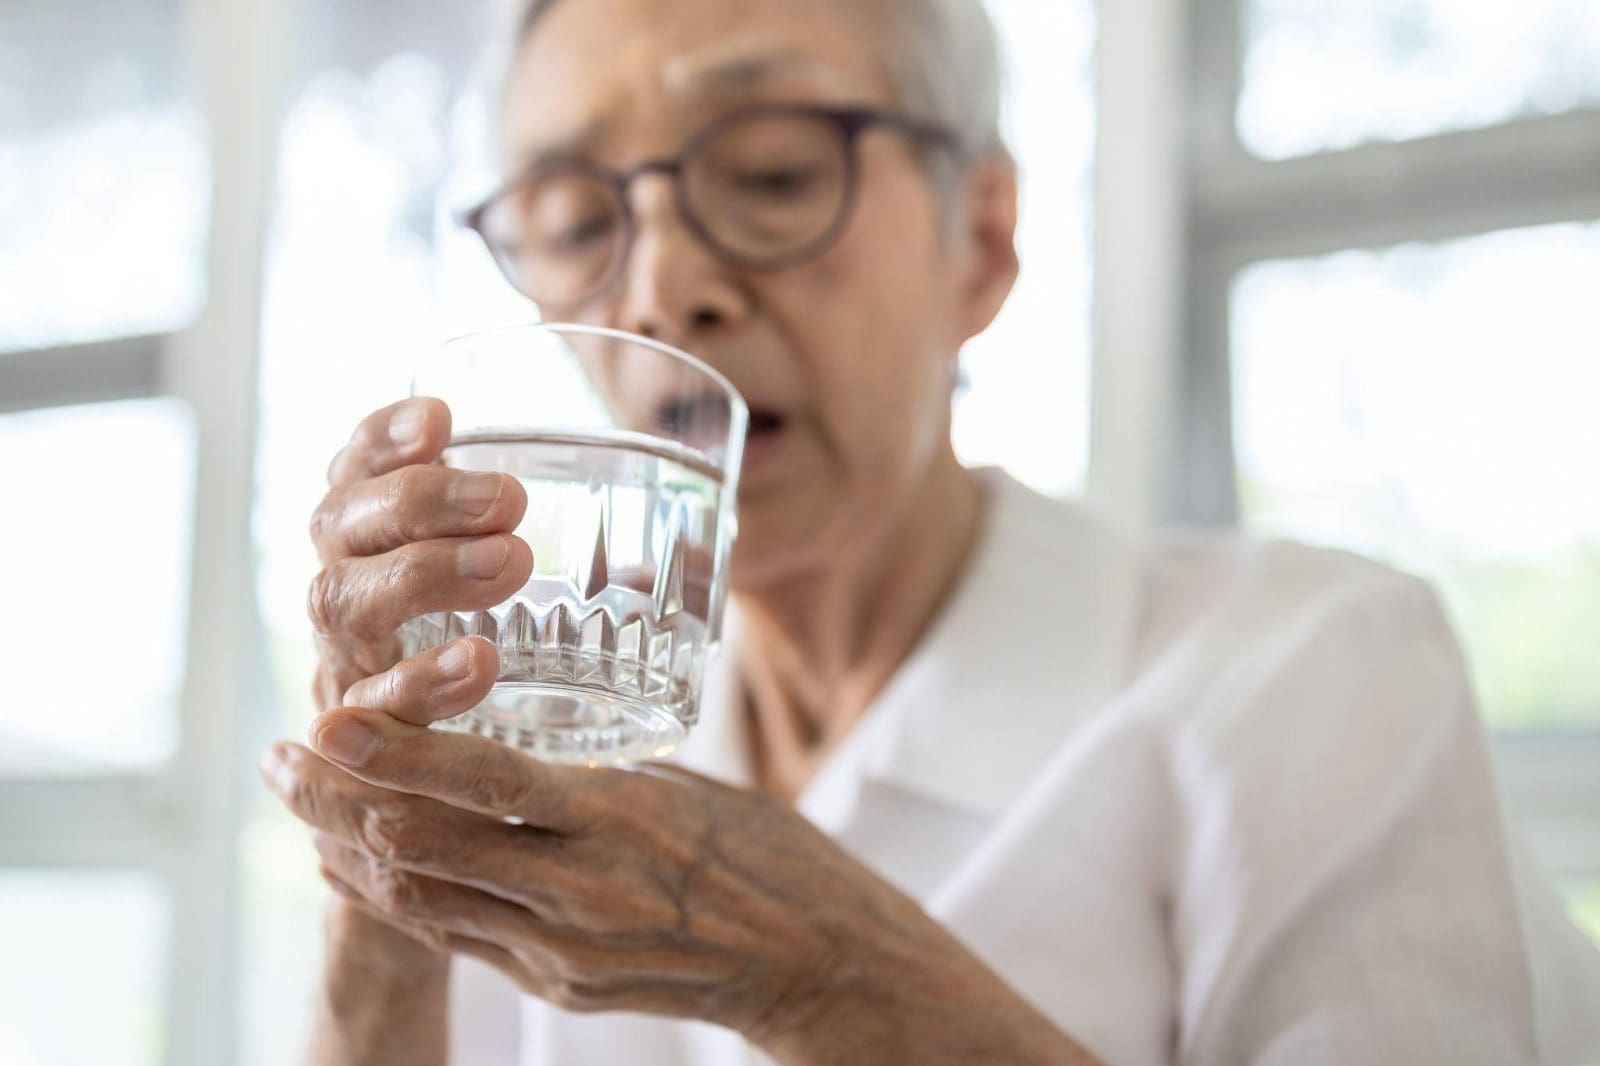 Senior woman steadying her shaky hand while drinking a glass of water.